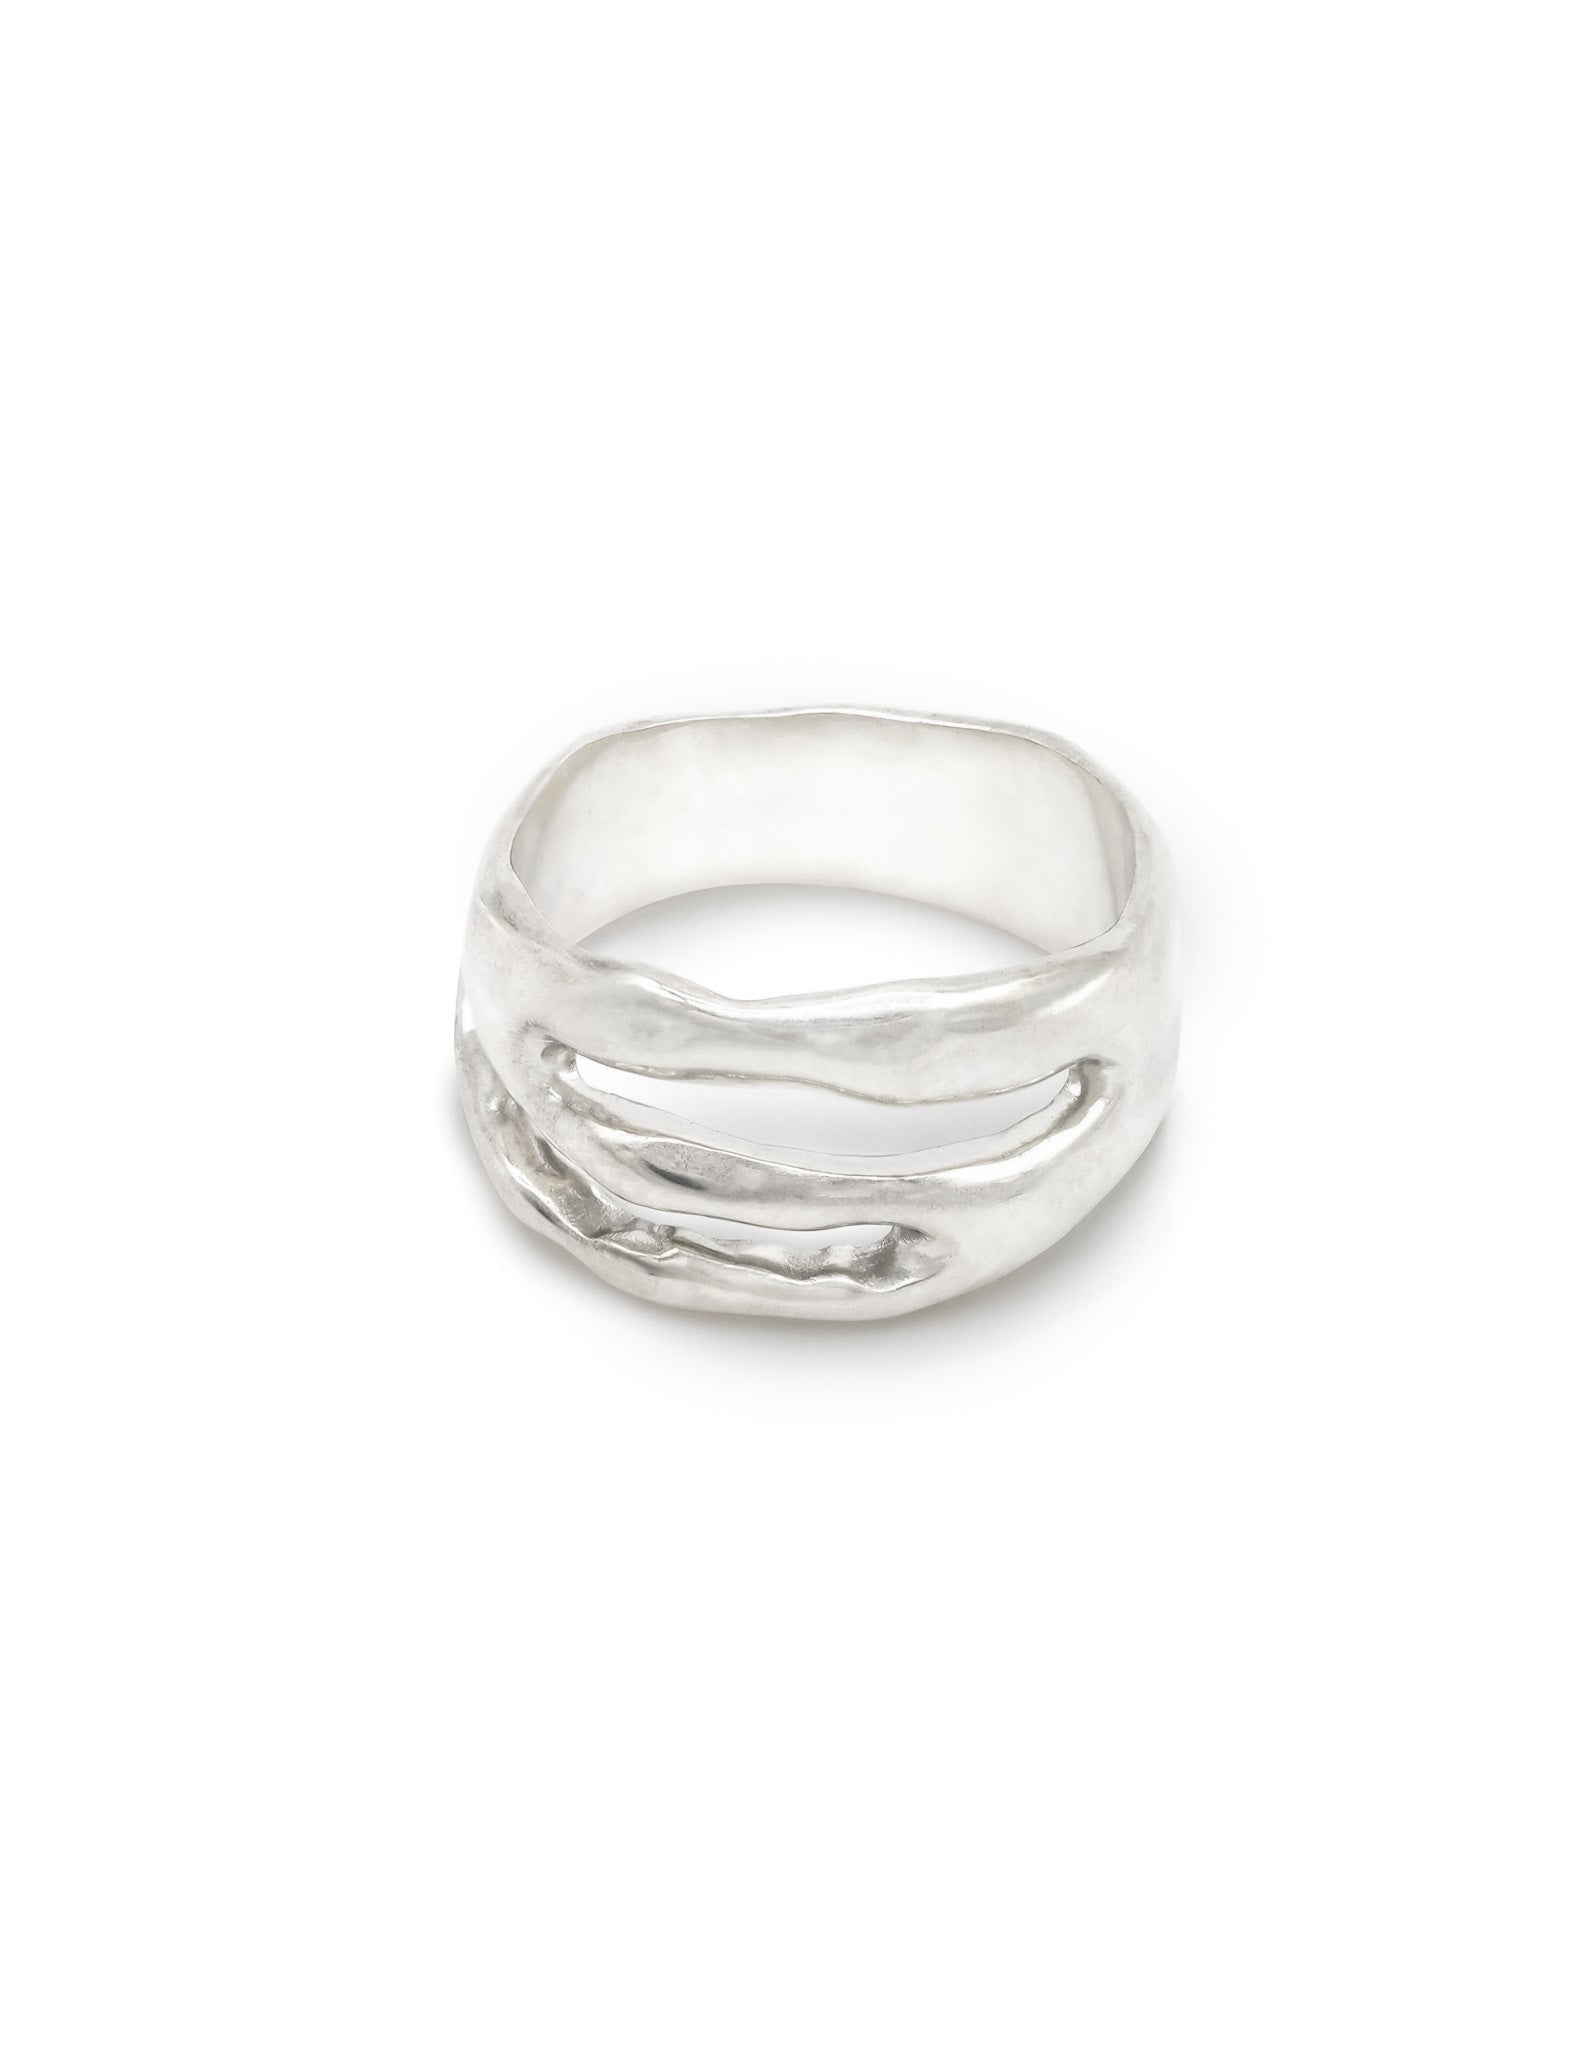 Kharys jewelry 925 sterling silver statement swell ring